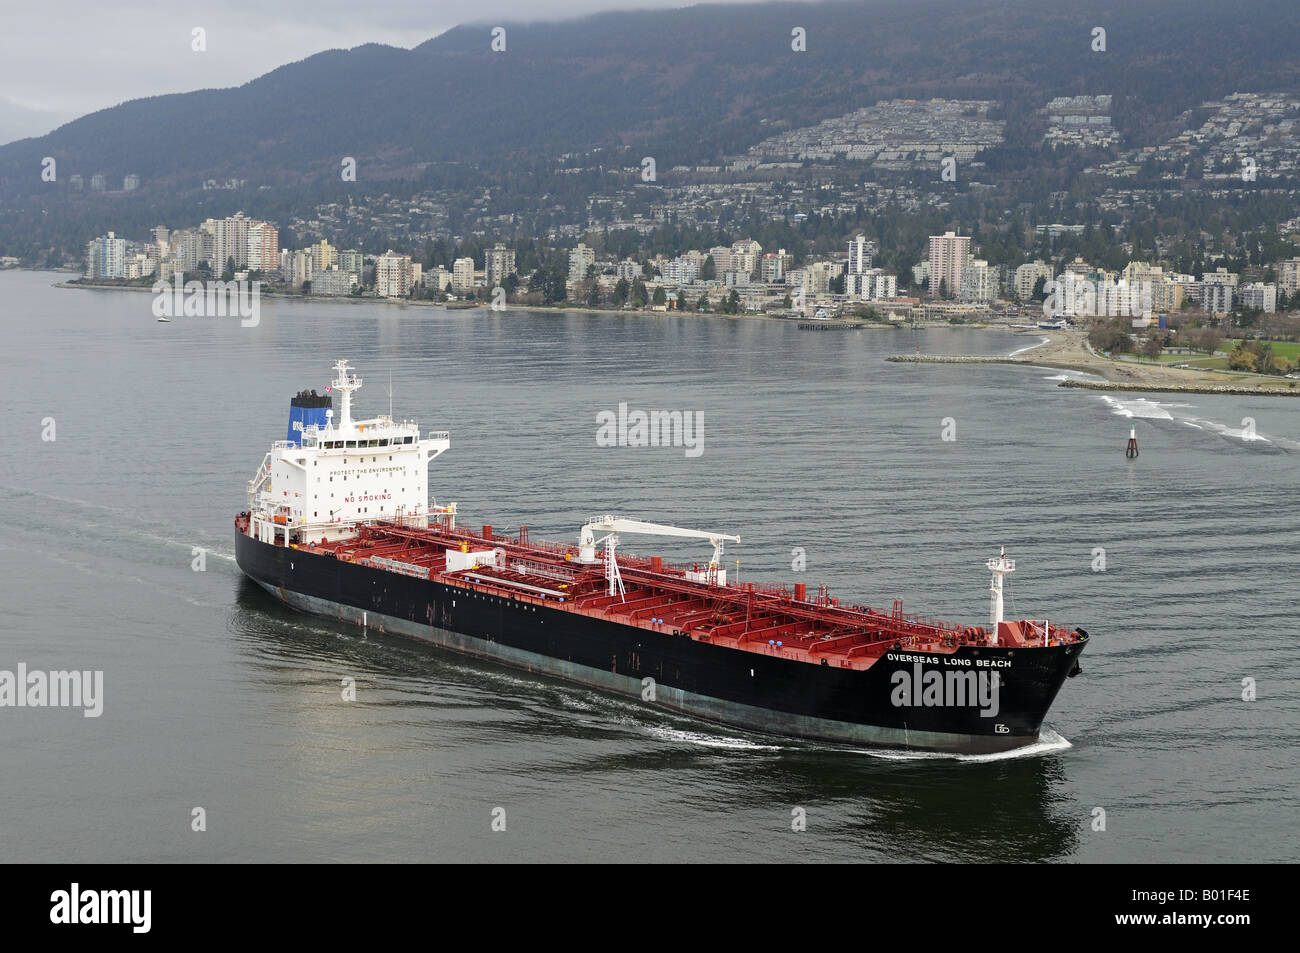 'Overseas Long Beach' Petroleum Chemical Tanker entering the Burrard Bay Inlet North Vancouver City B.C. British Columbia Canada Stock Photo